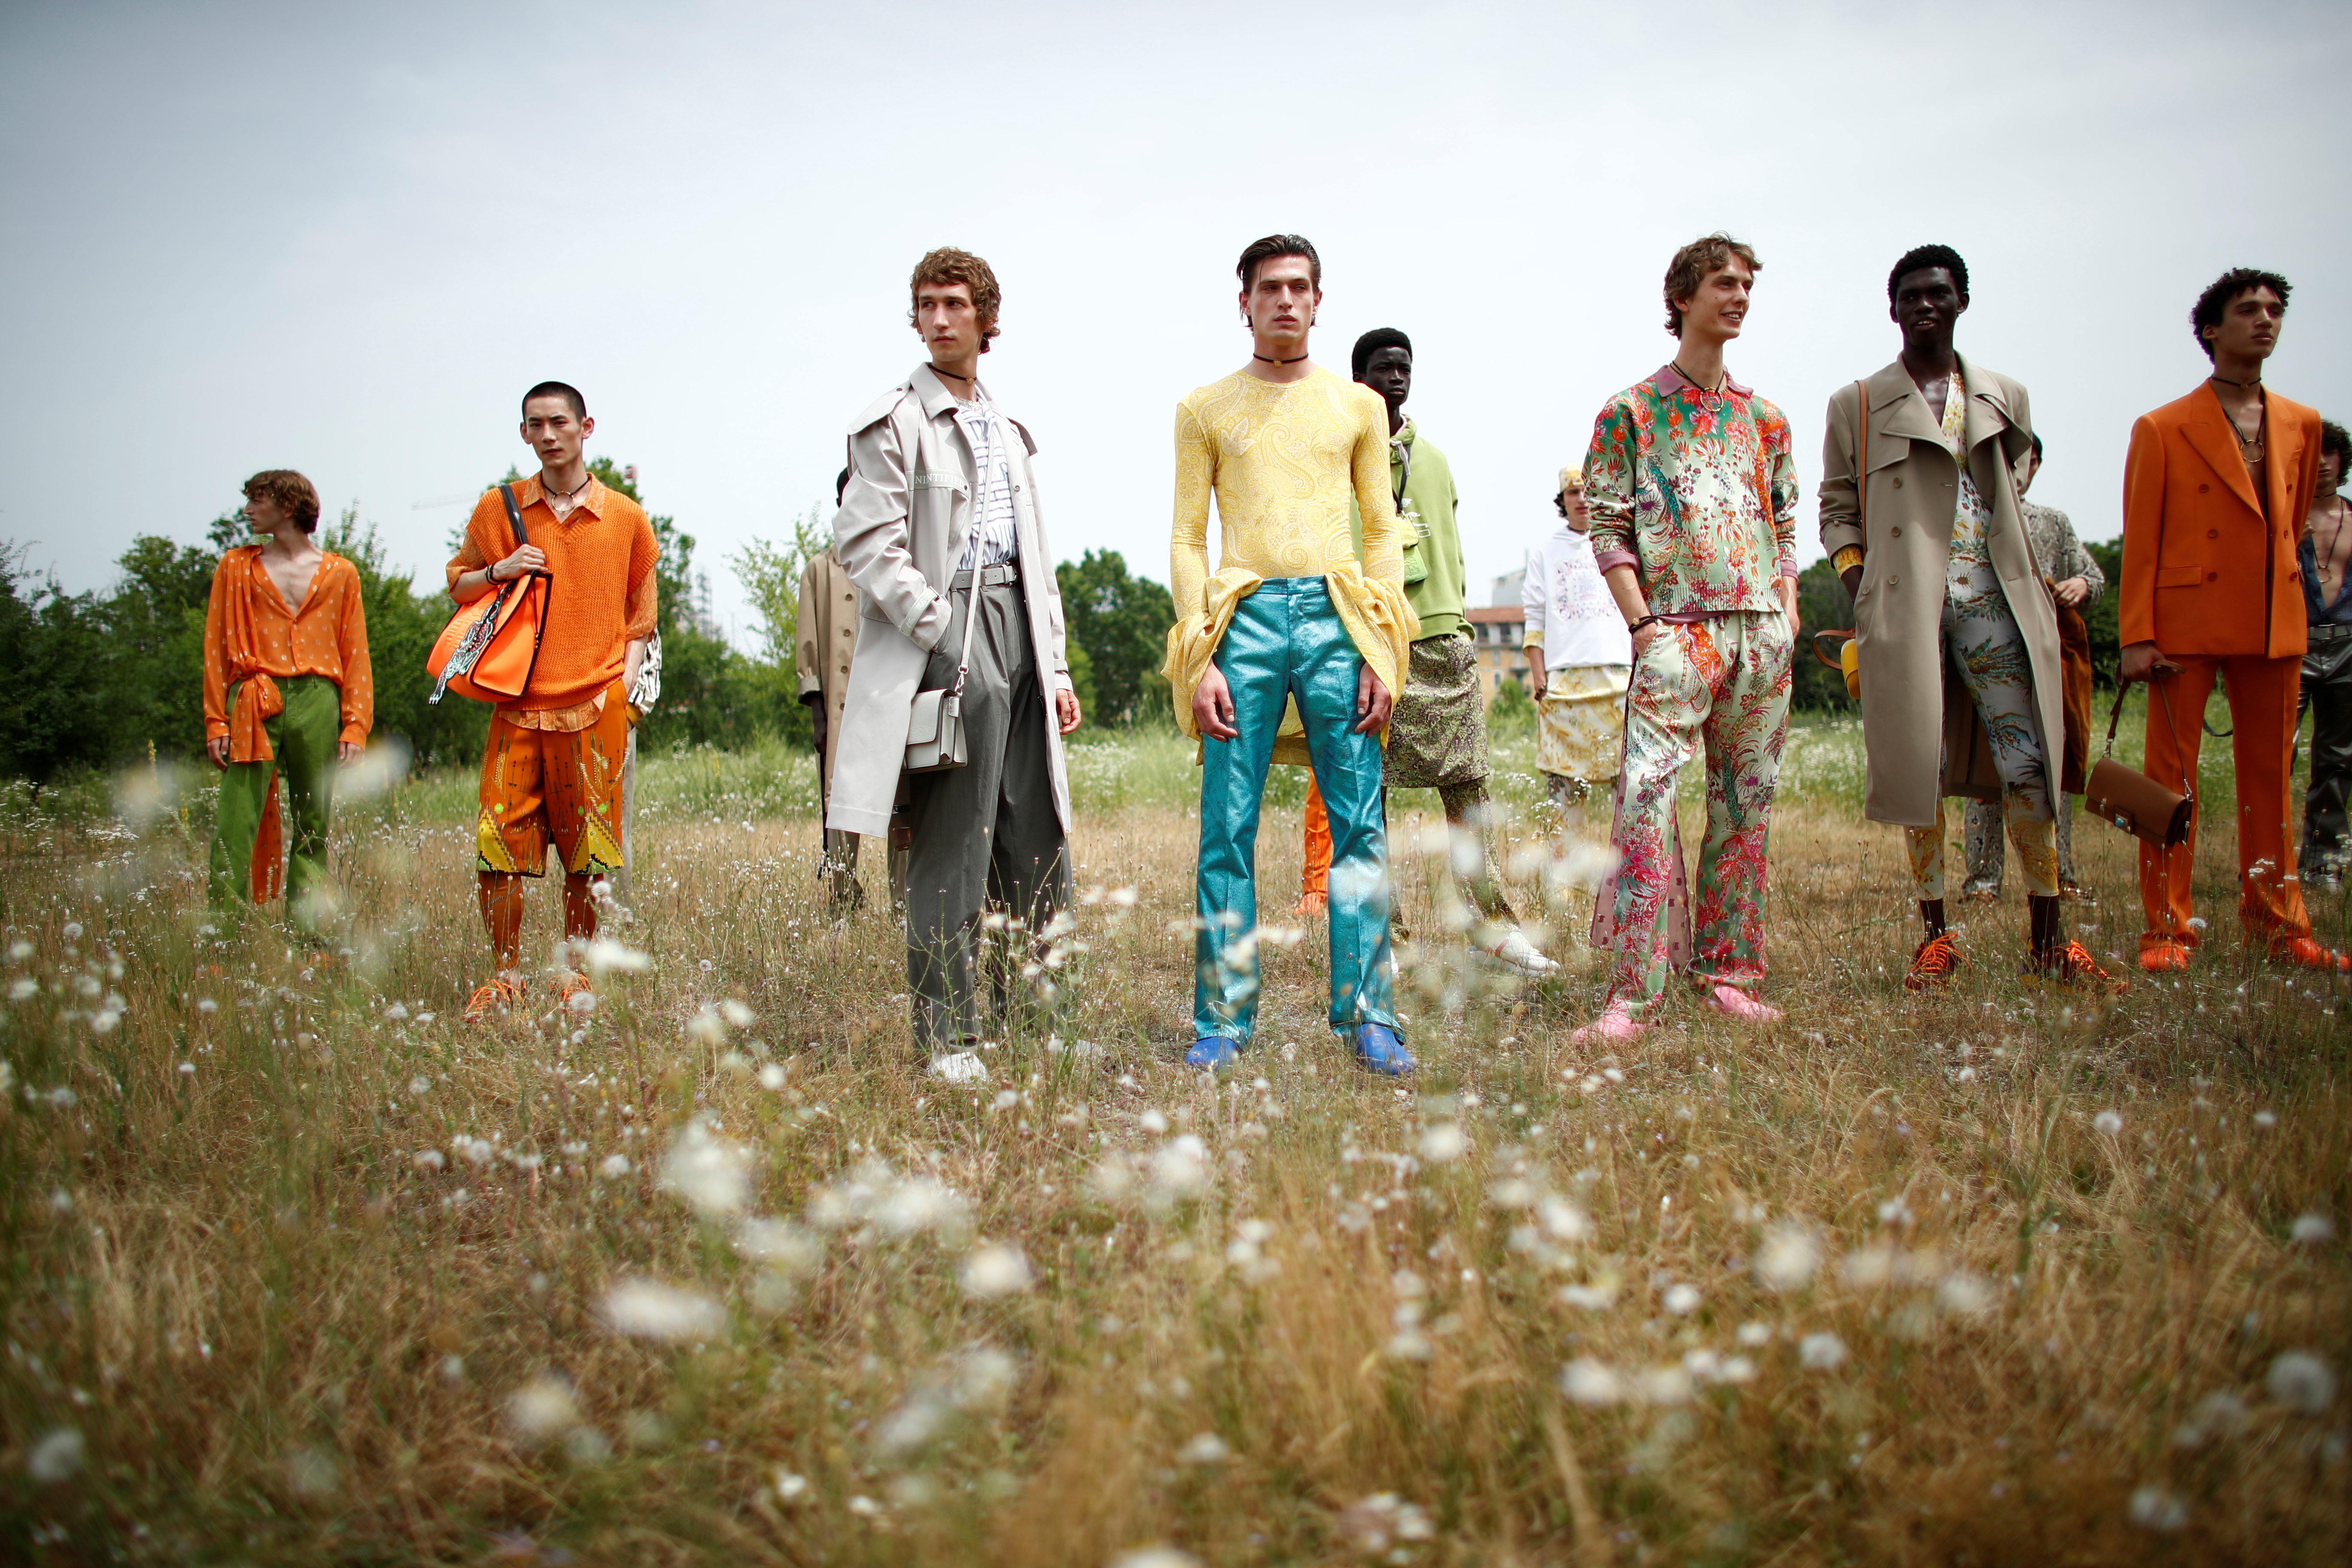 LVMH-backed L Catterton to buy 60% of Italian fashion label Etro